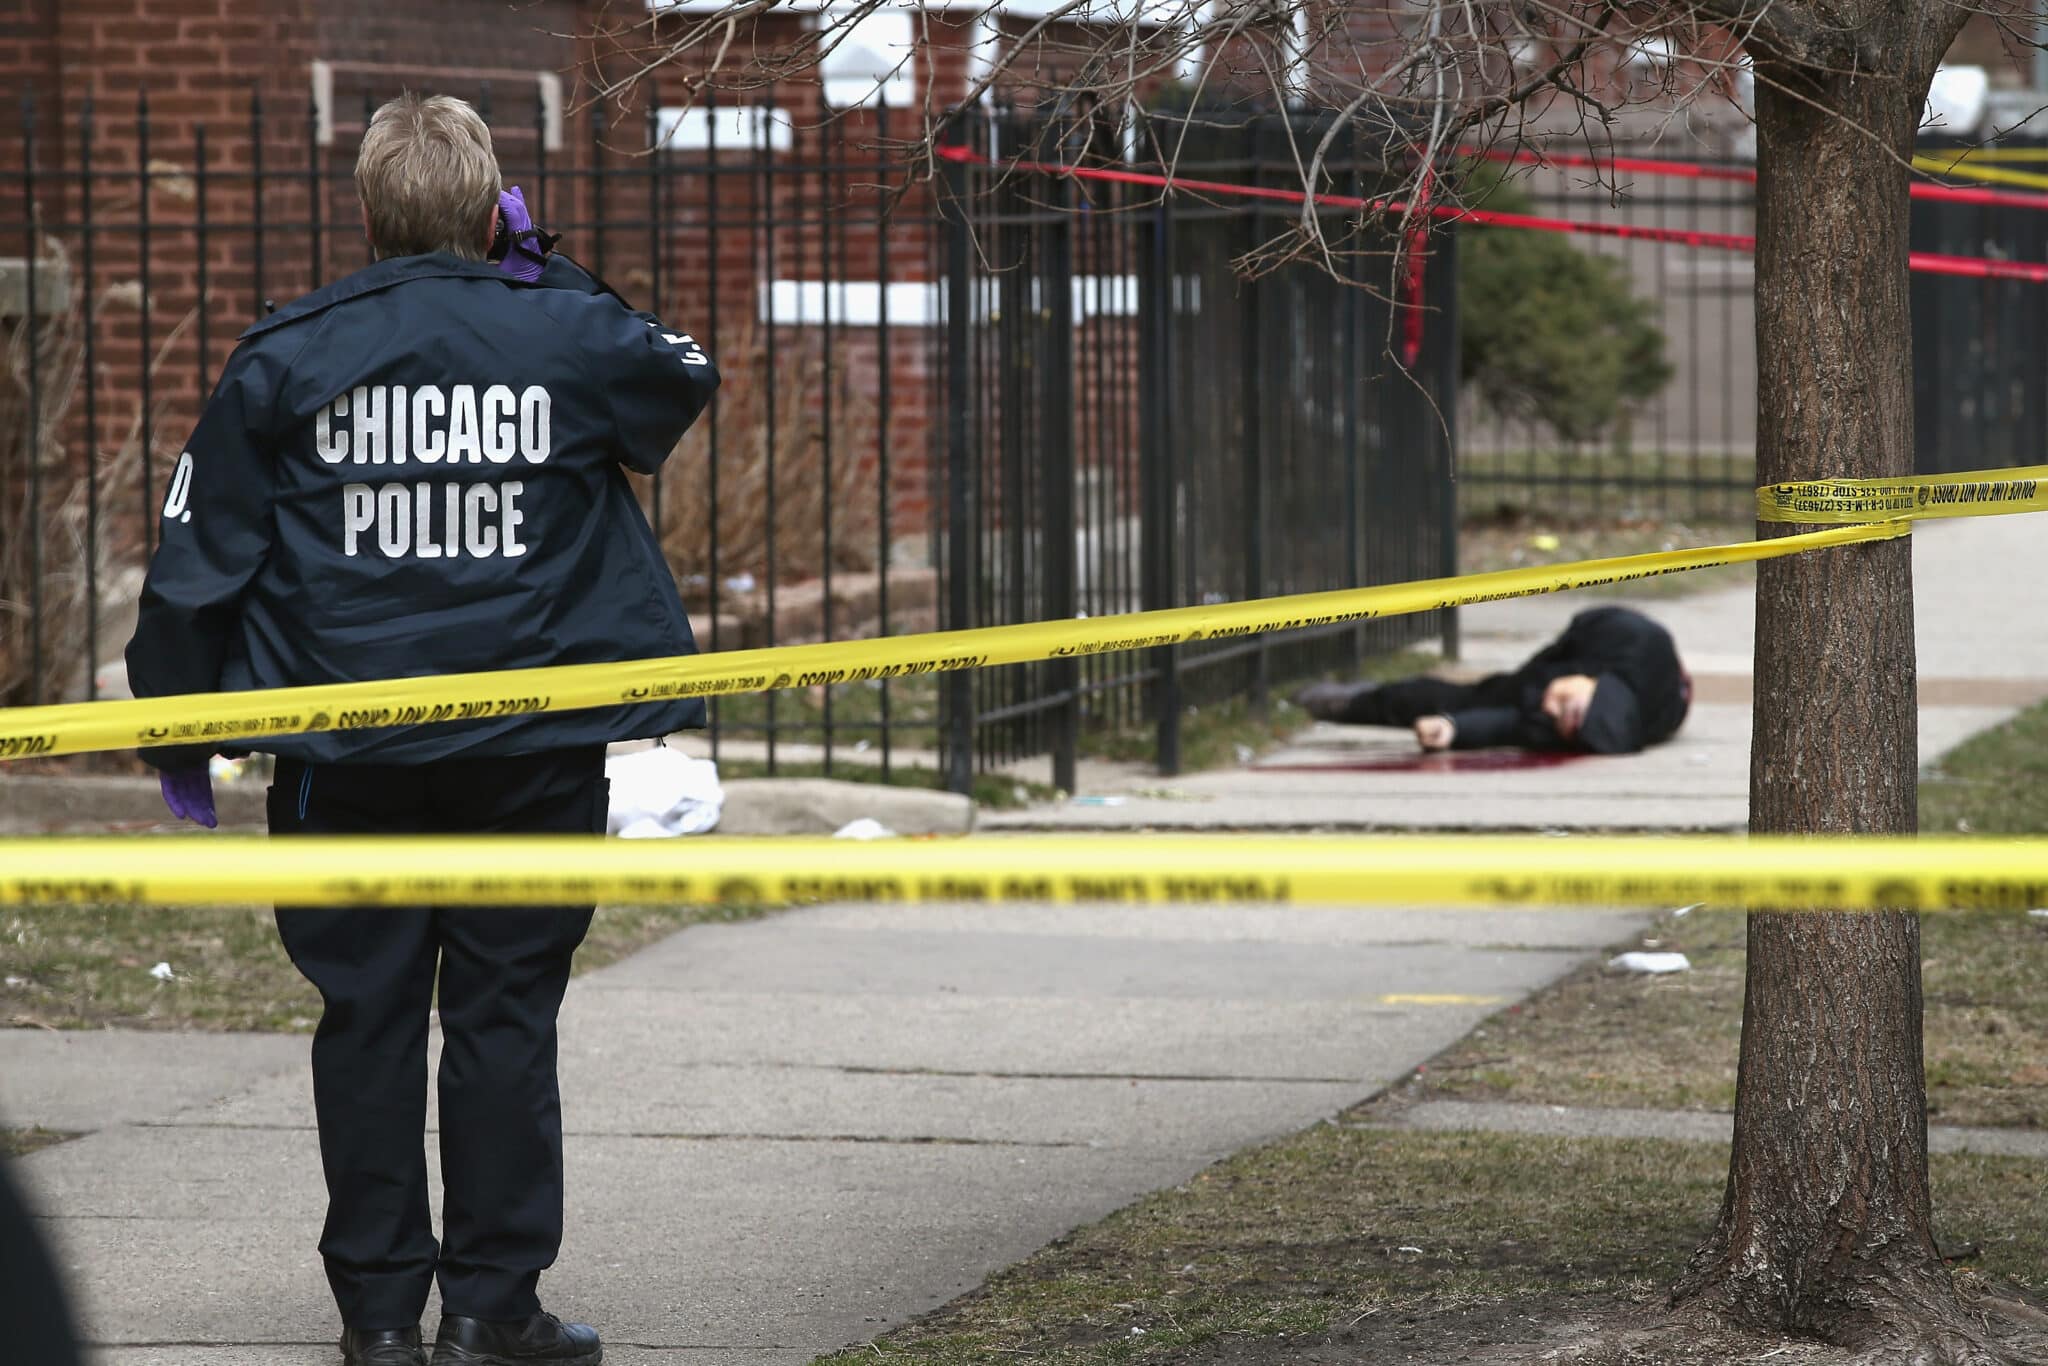 CHICAGO, IL - APRIL 01: (EDITORS NOTE: Image contains graphic content.) Chicago police investigate the murder of a 24-year-old man who was shot and killed on South Eberhart Avenue on the city's South Side April 1, 2013 in Chicago, Illinois. According to published reports, the man was the 73rd homicide victim and the 39th victim under the age of 25 in Chicago in 2013.  (Photo by Scott Olson/Getty Images)